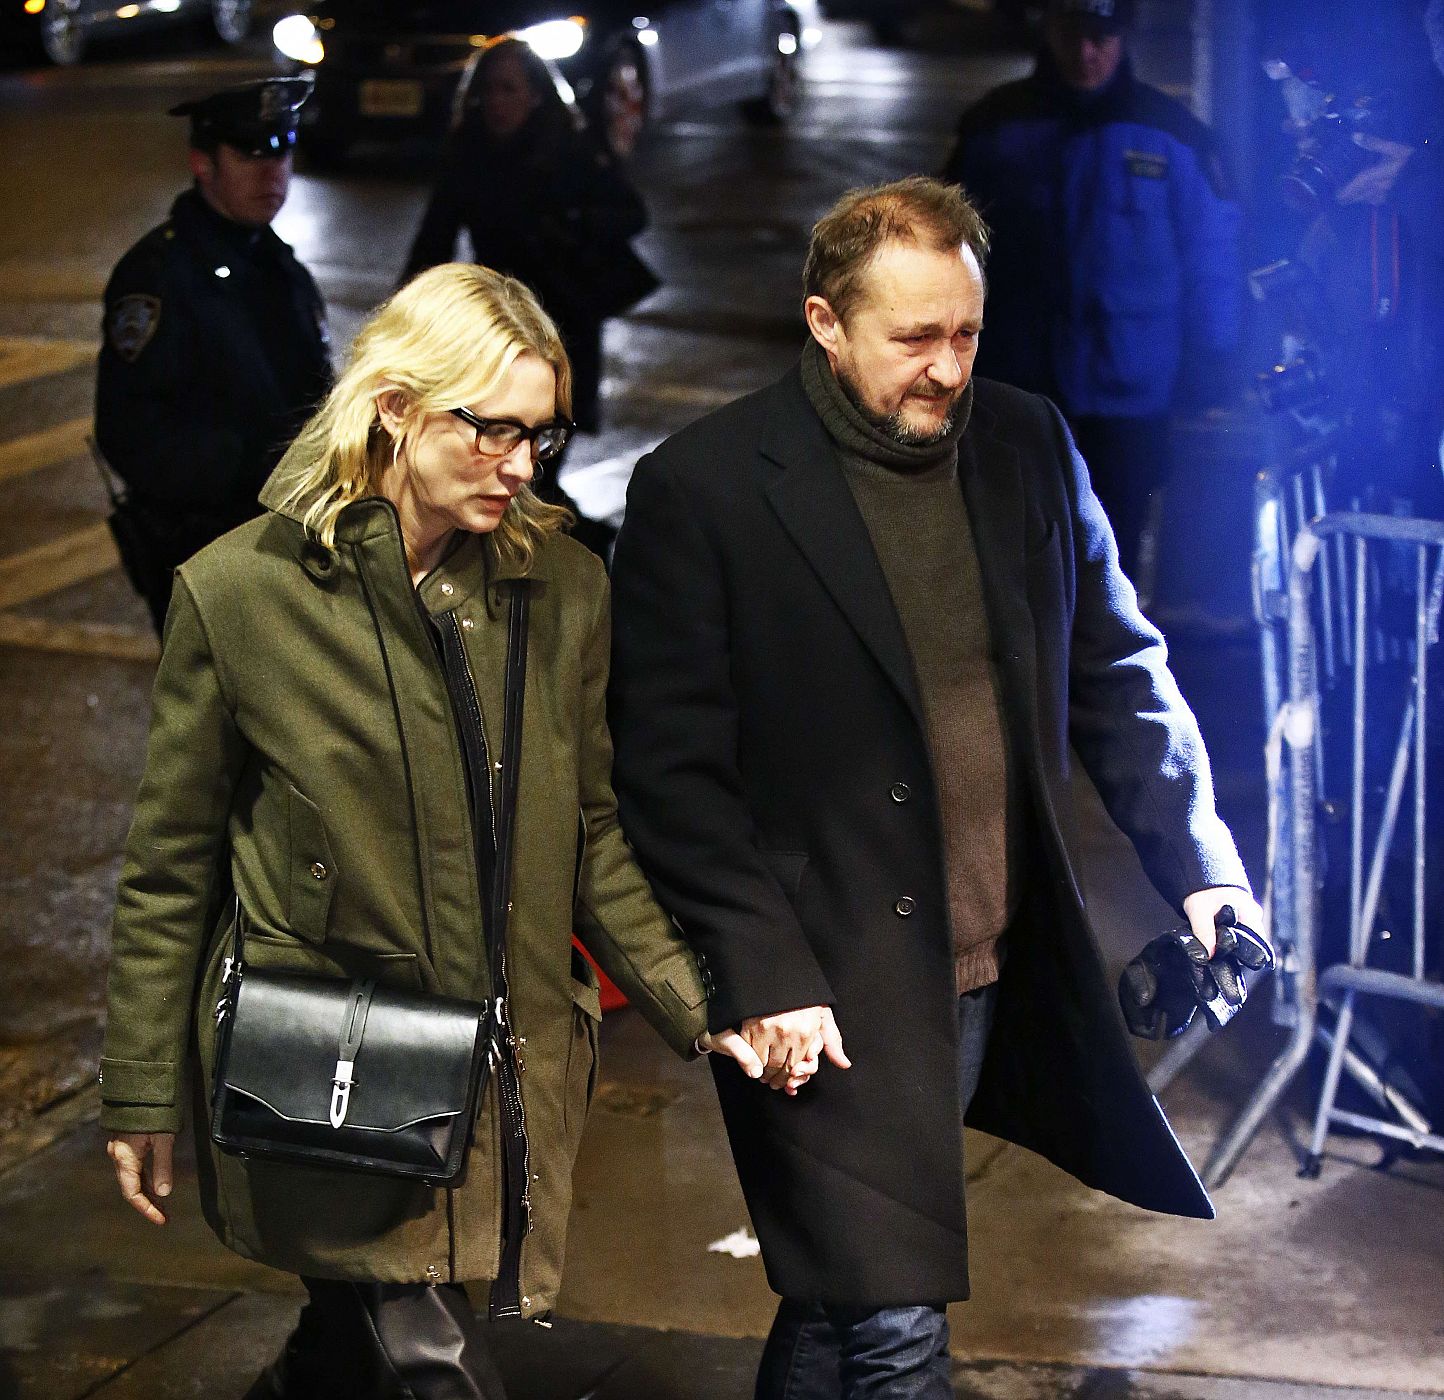 Actress Blanchett and her husband Upton arrive for the funeral of deceased actor Hoffman, in Manhattan